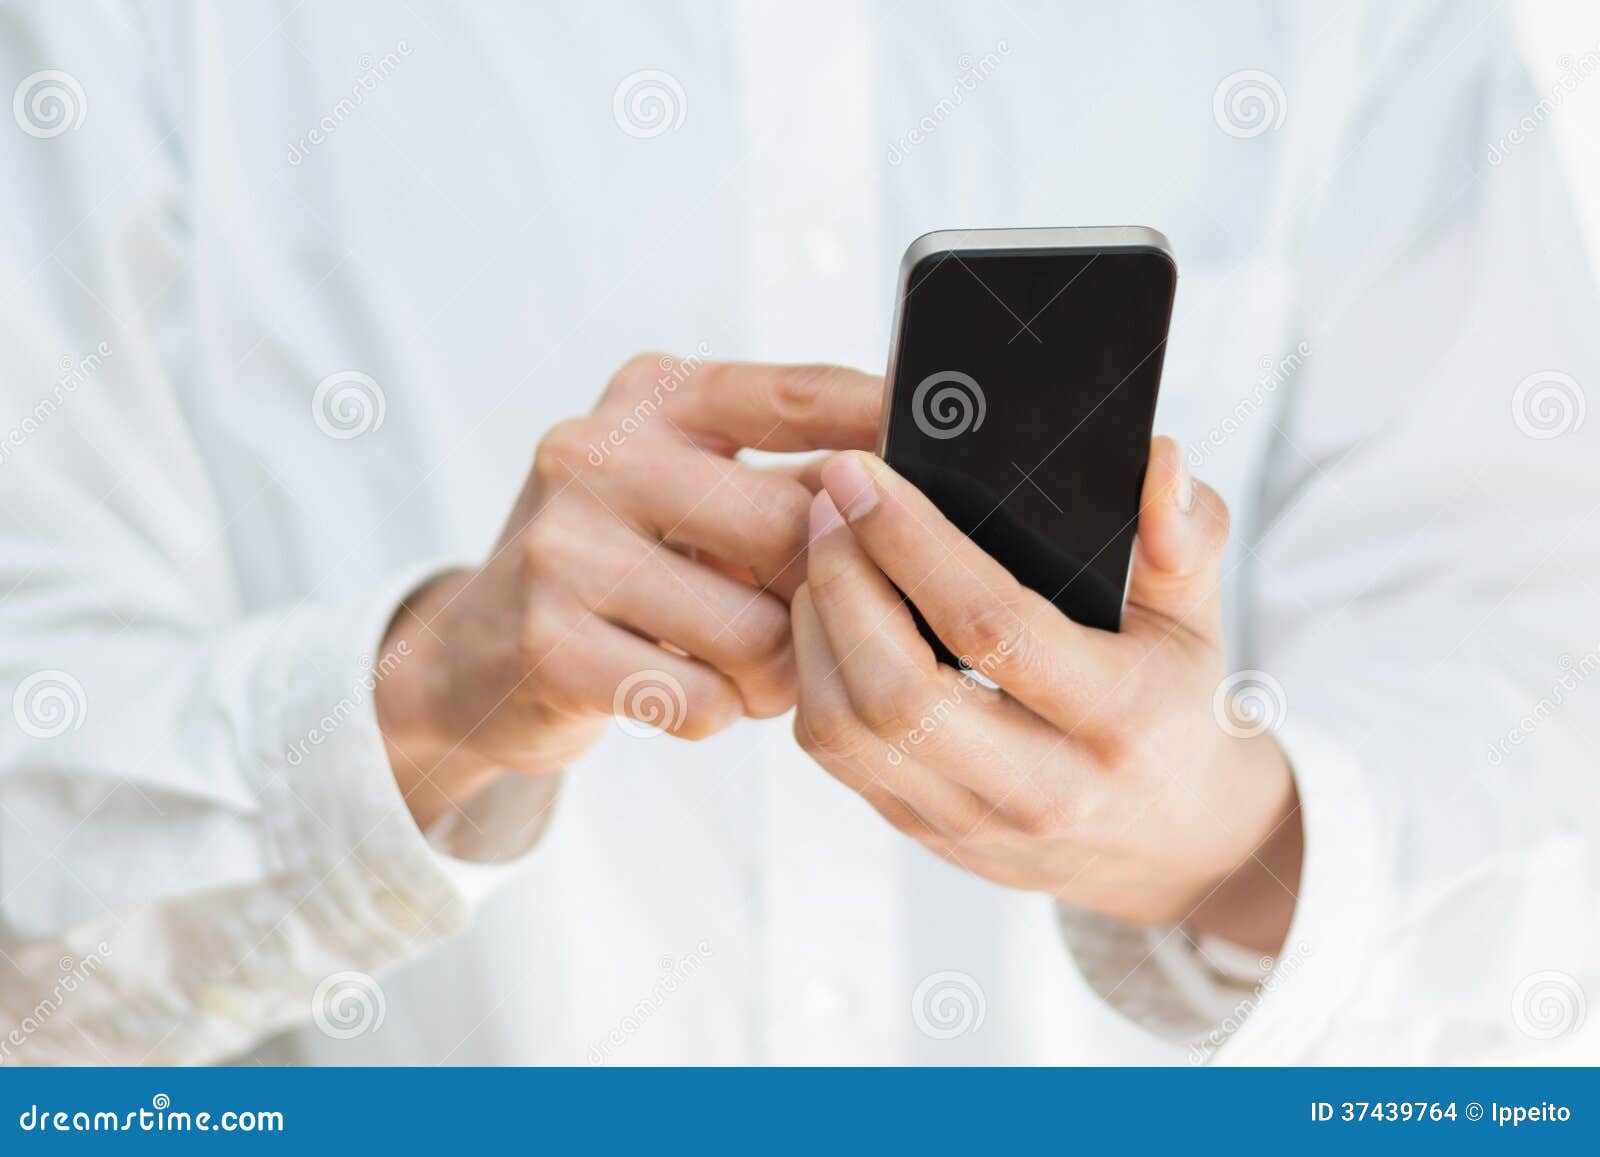 Man Using a Mobile Smartphone Stock Photo - Image of internet, male ...